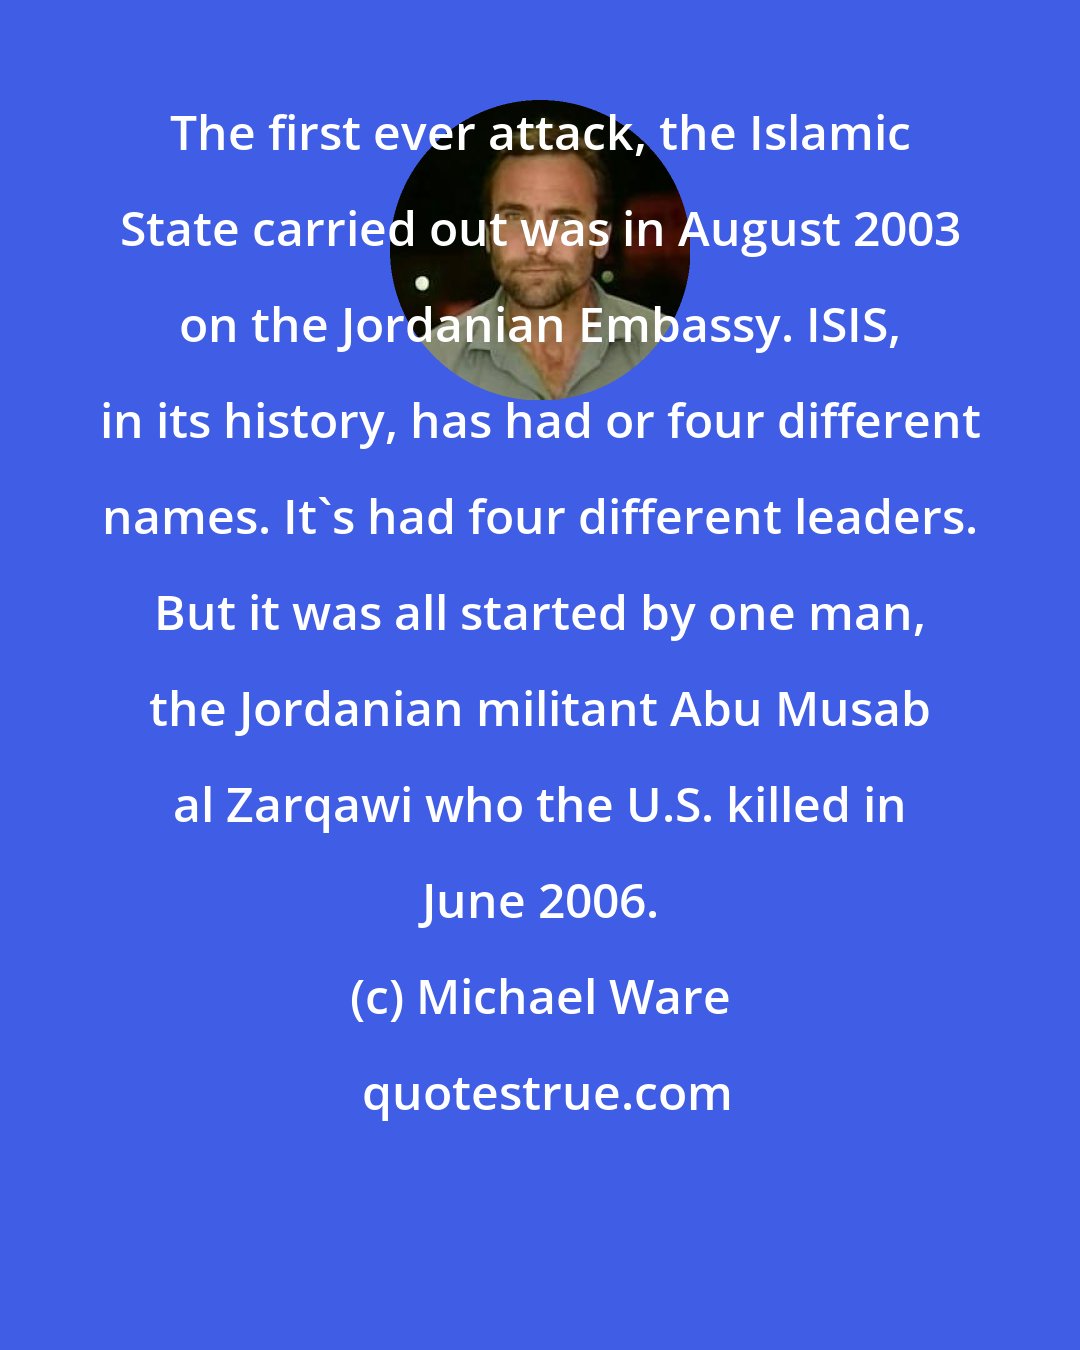 Michael Ware: The first ever attack, the Islamic State carried out was in August 2003 on the Jordanian Embassy. ISIS, in its history, has had or four different names. It's had four different leaders. But it was all started by one man, the Jordanian militant Abu Musab al Zarqawi who the U.S. killed in June 2006.